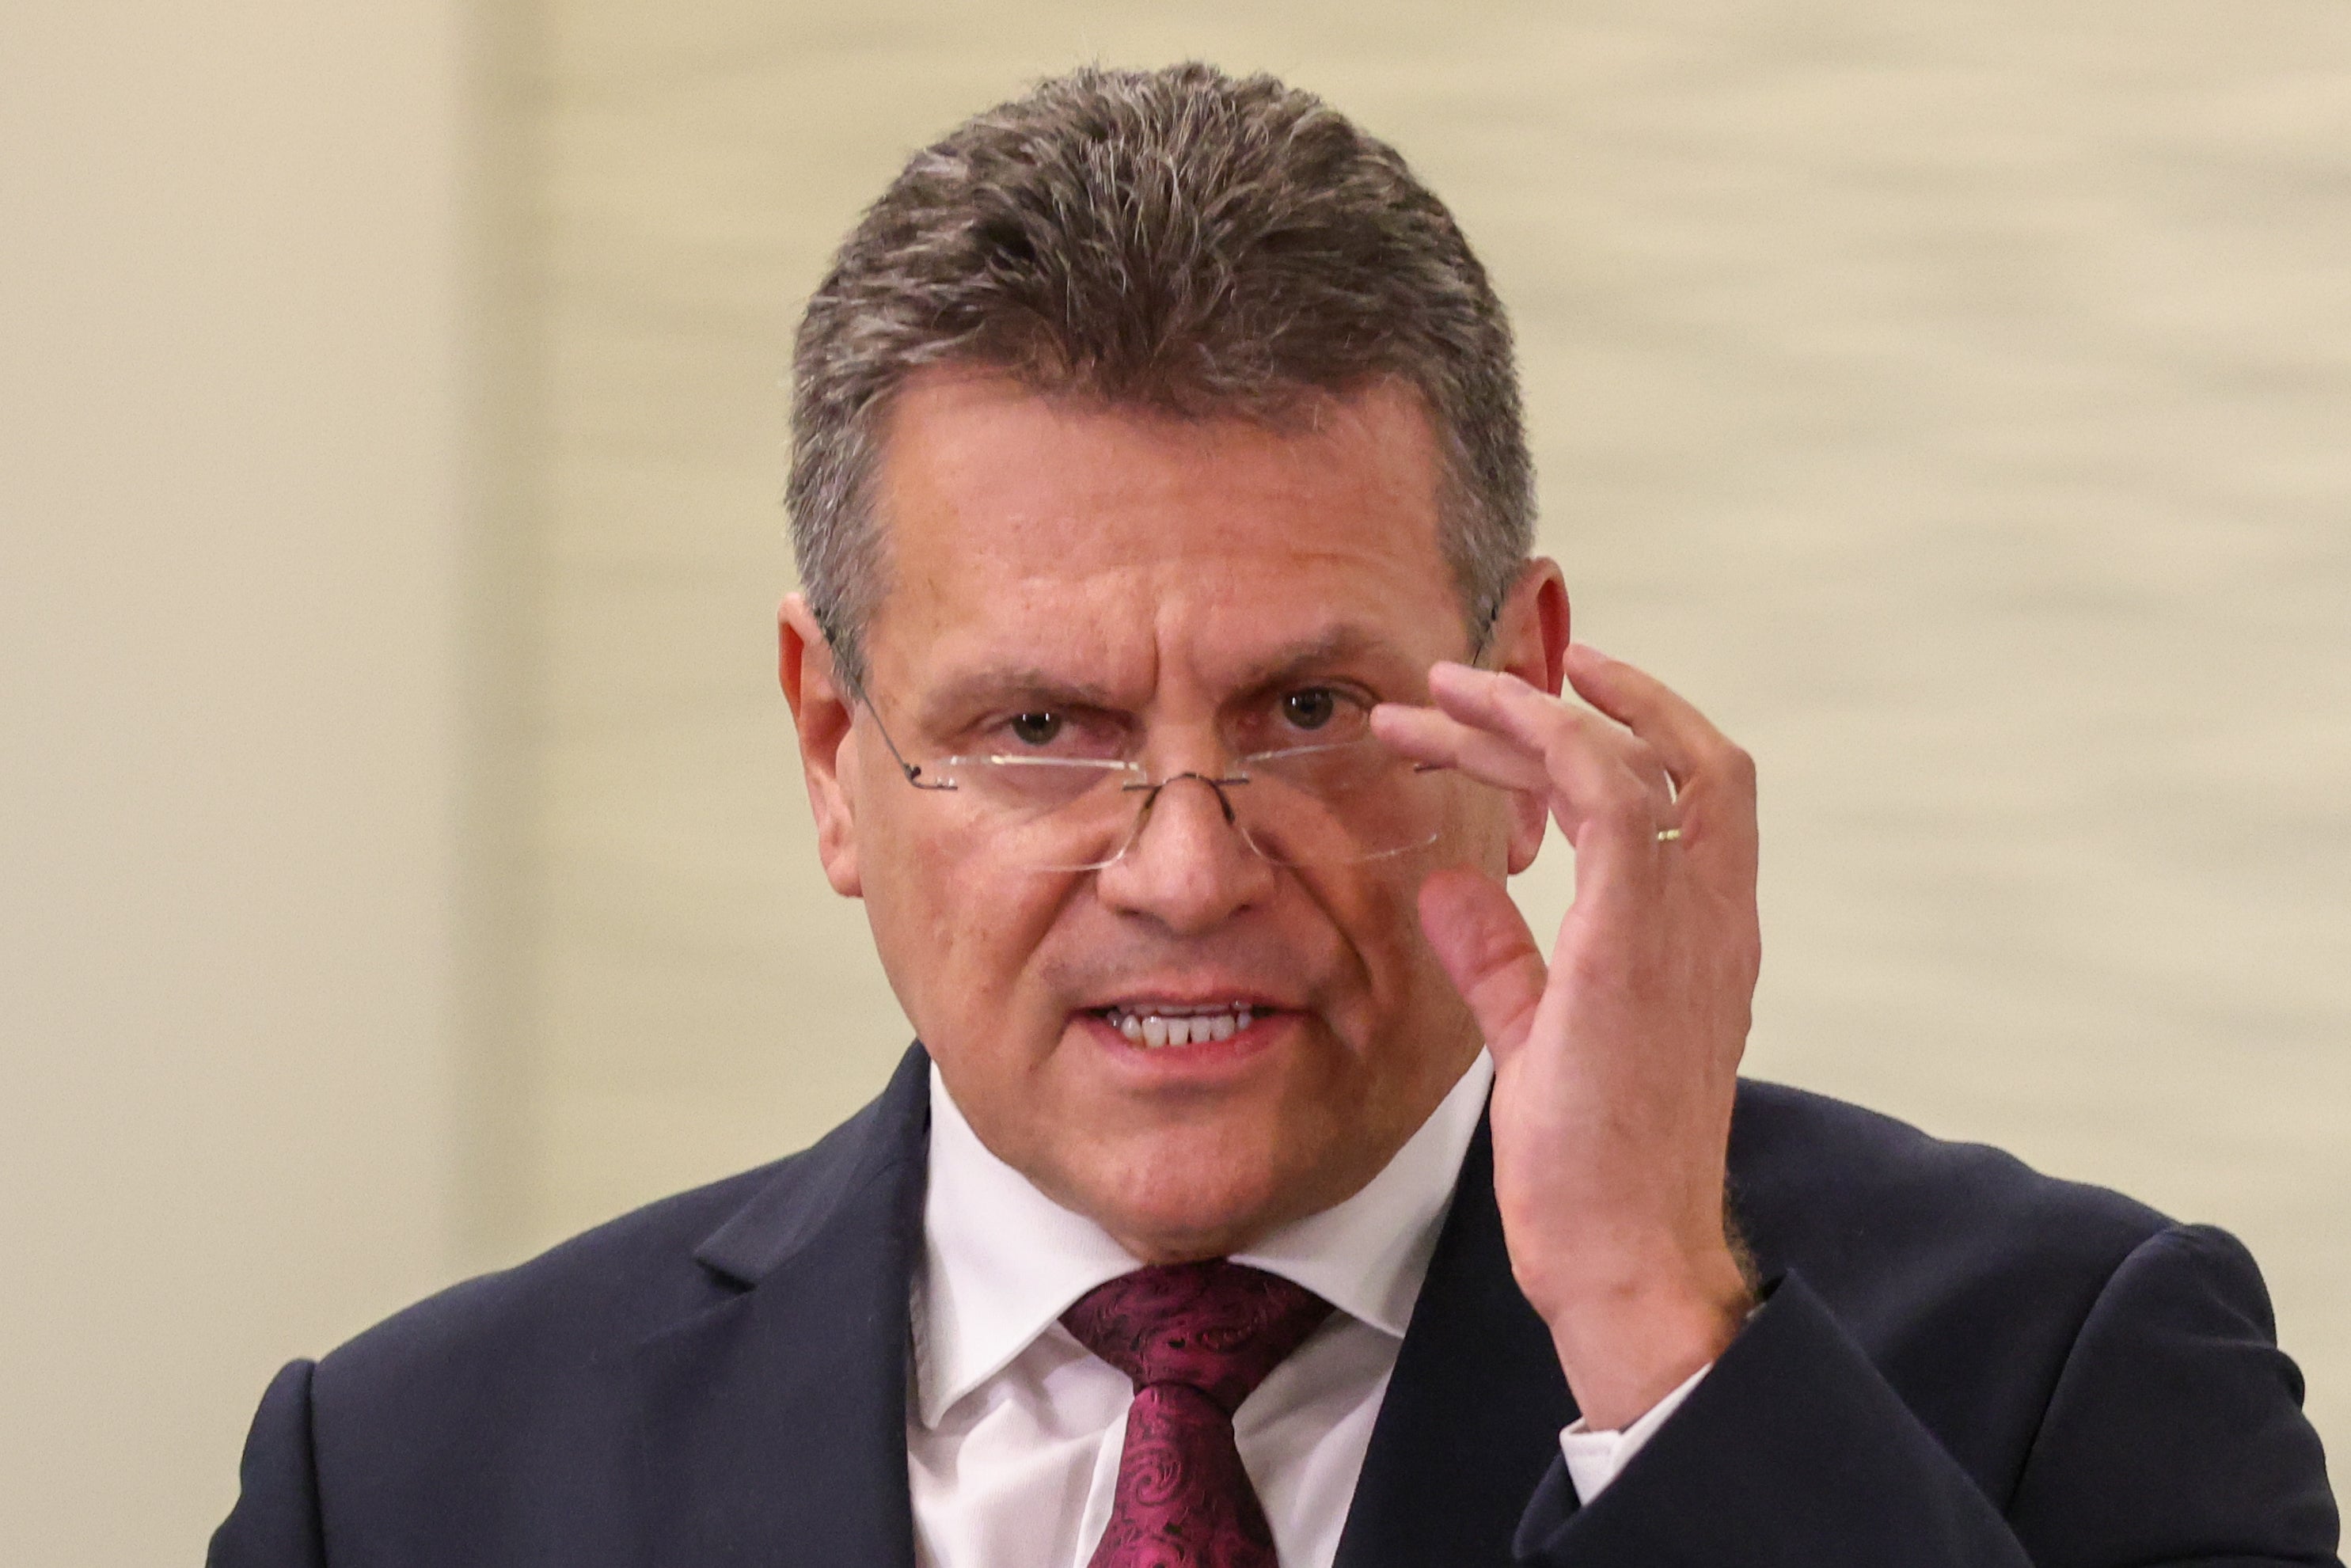 EU Commission vice president Maros Sefcovic said ‘London has breached a great deal of trust’ with Europe (Hollie Adams/PA)